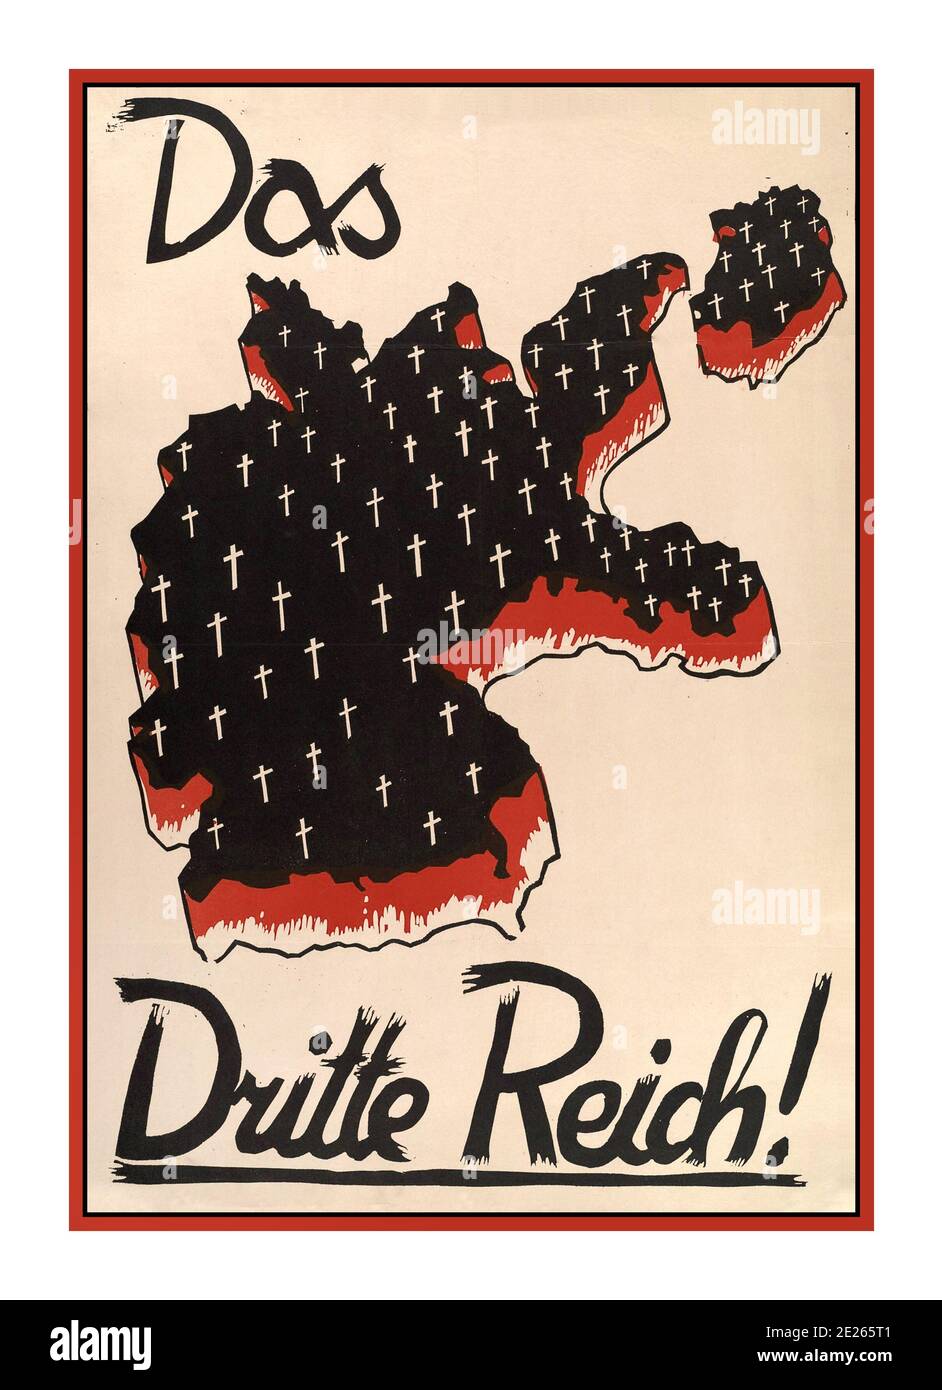 1932 Archive German Anti-Nazi Election Propaganda  DAS DRITTE REICH The Third Reich! Election Propaganda Poster Germany Map of Germany with white crosses 1930’s. Drawing of a relief map of Germany, stained with blood and filled with white crosses marking graves. Stock Photo